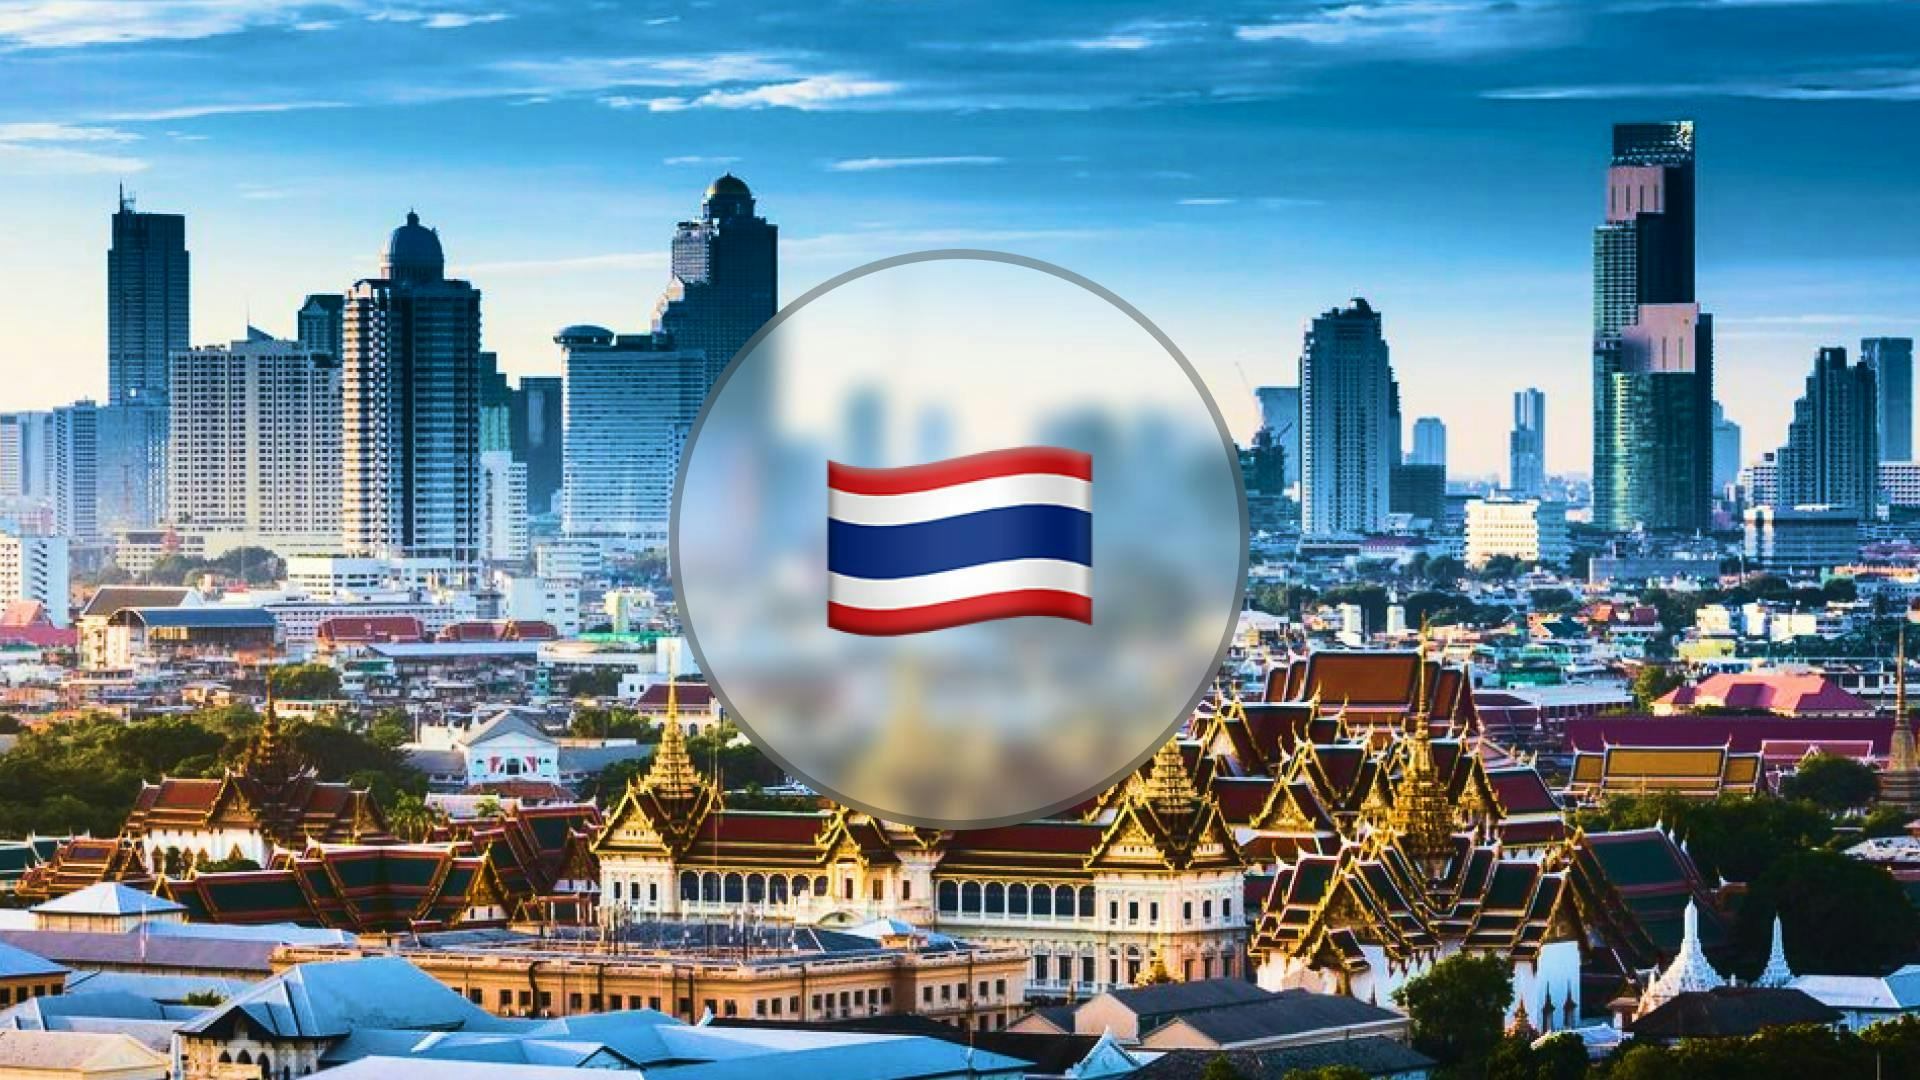 Thailand Sets Ambitious Target to Become High-Tech Hub with 280,000 Strong Workforce